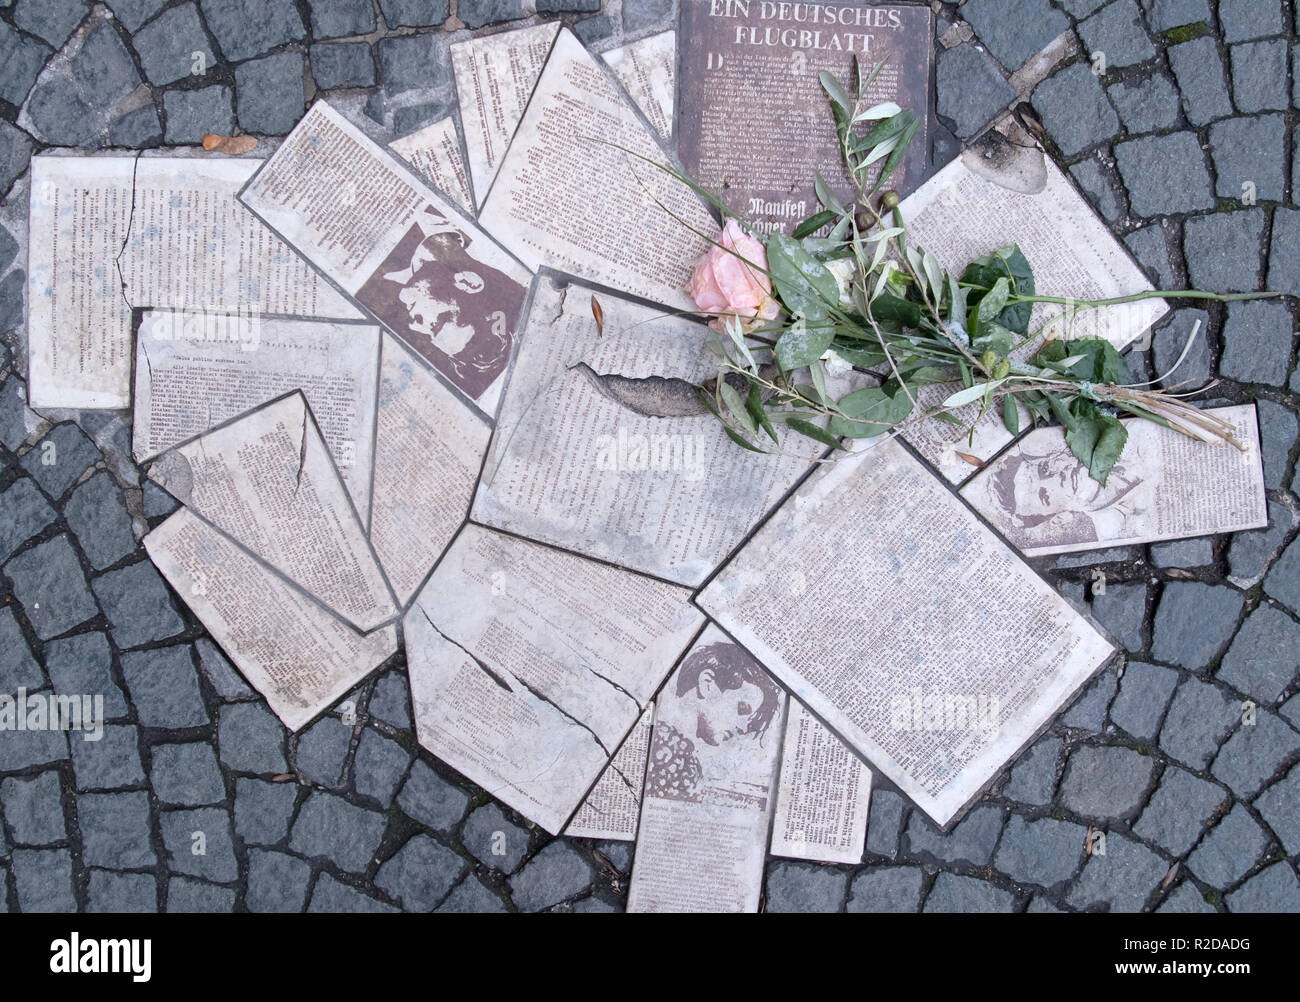 19 November 2018, Bavaria, München: In front of the entrance to the main  building of the Ludwig-Maximilians-Universität (LMU) at  Geschwister-Scholl-Platz the leaflets of the resistance group "White Rose"  are embedded in the